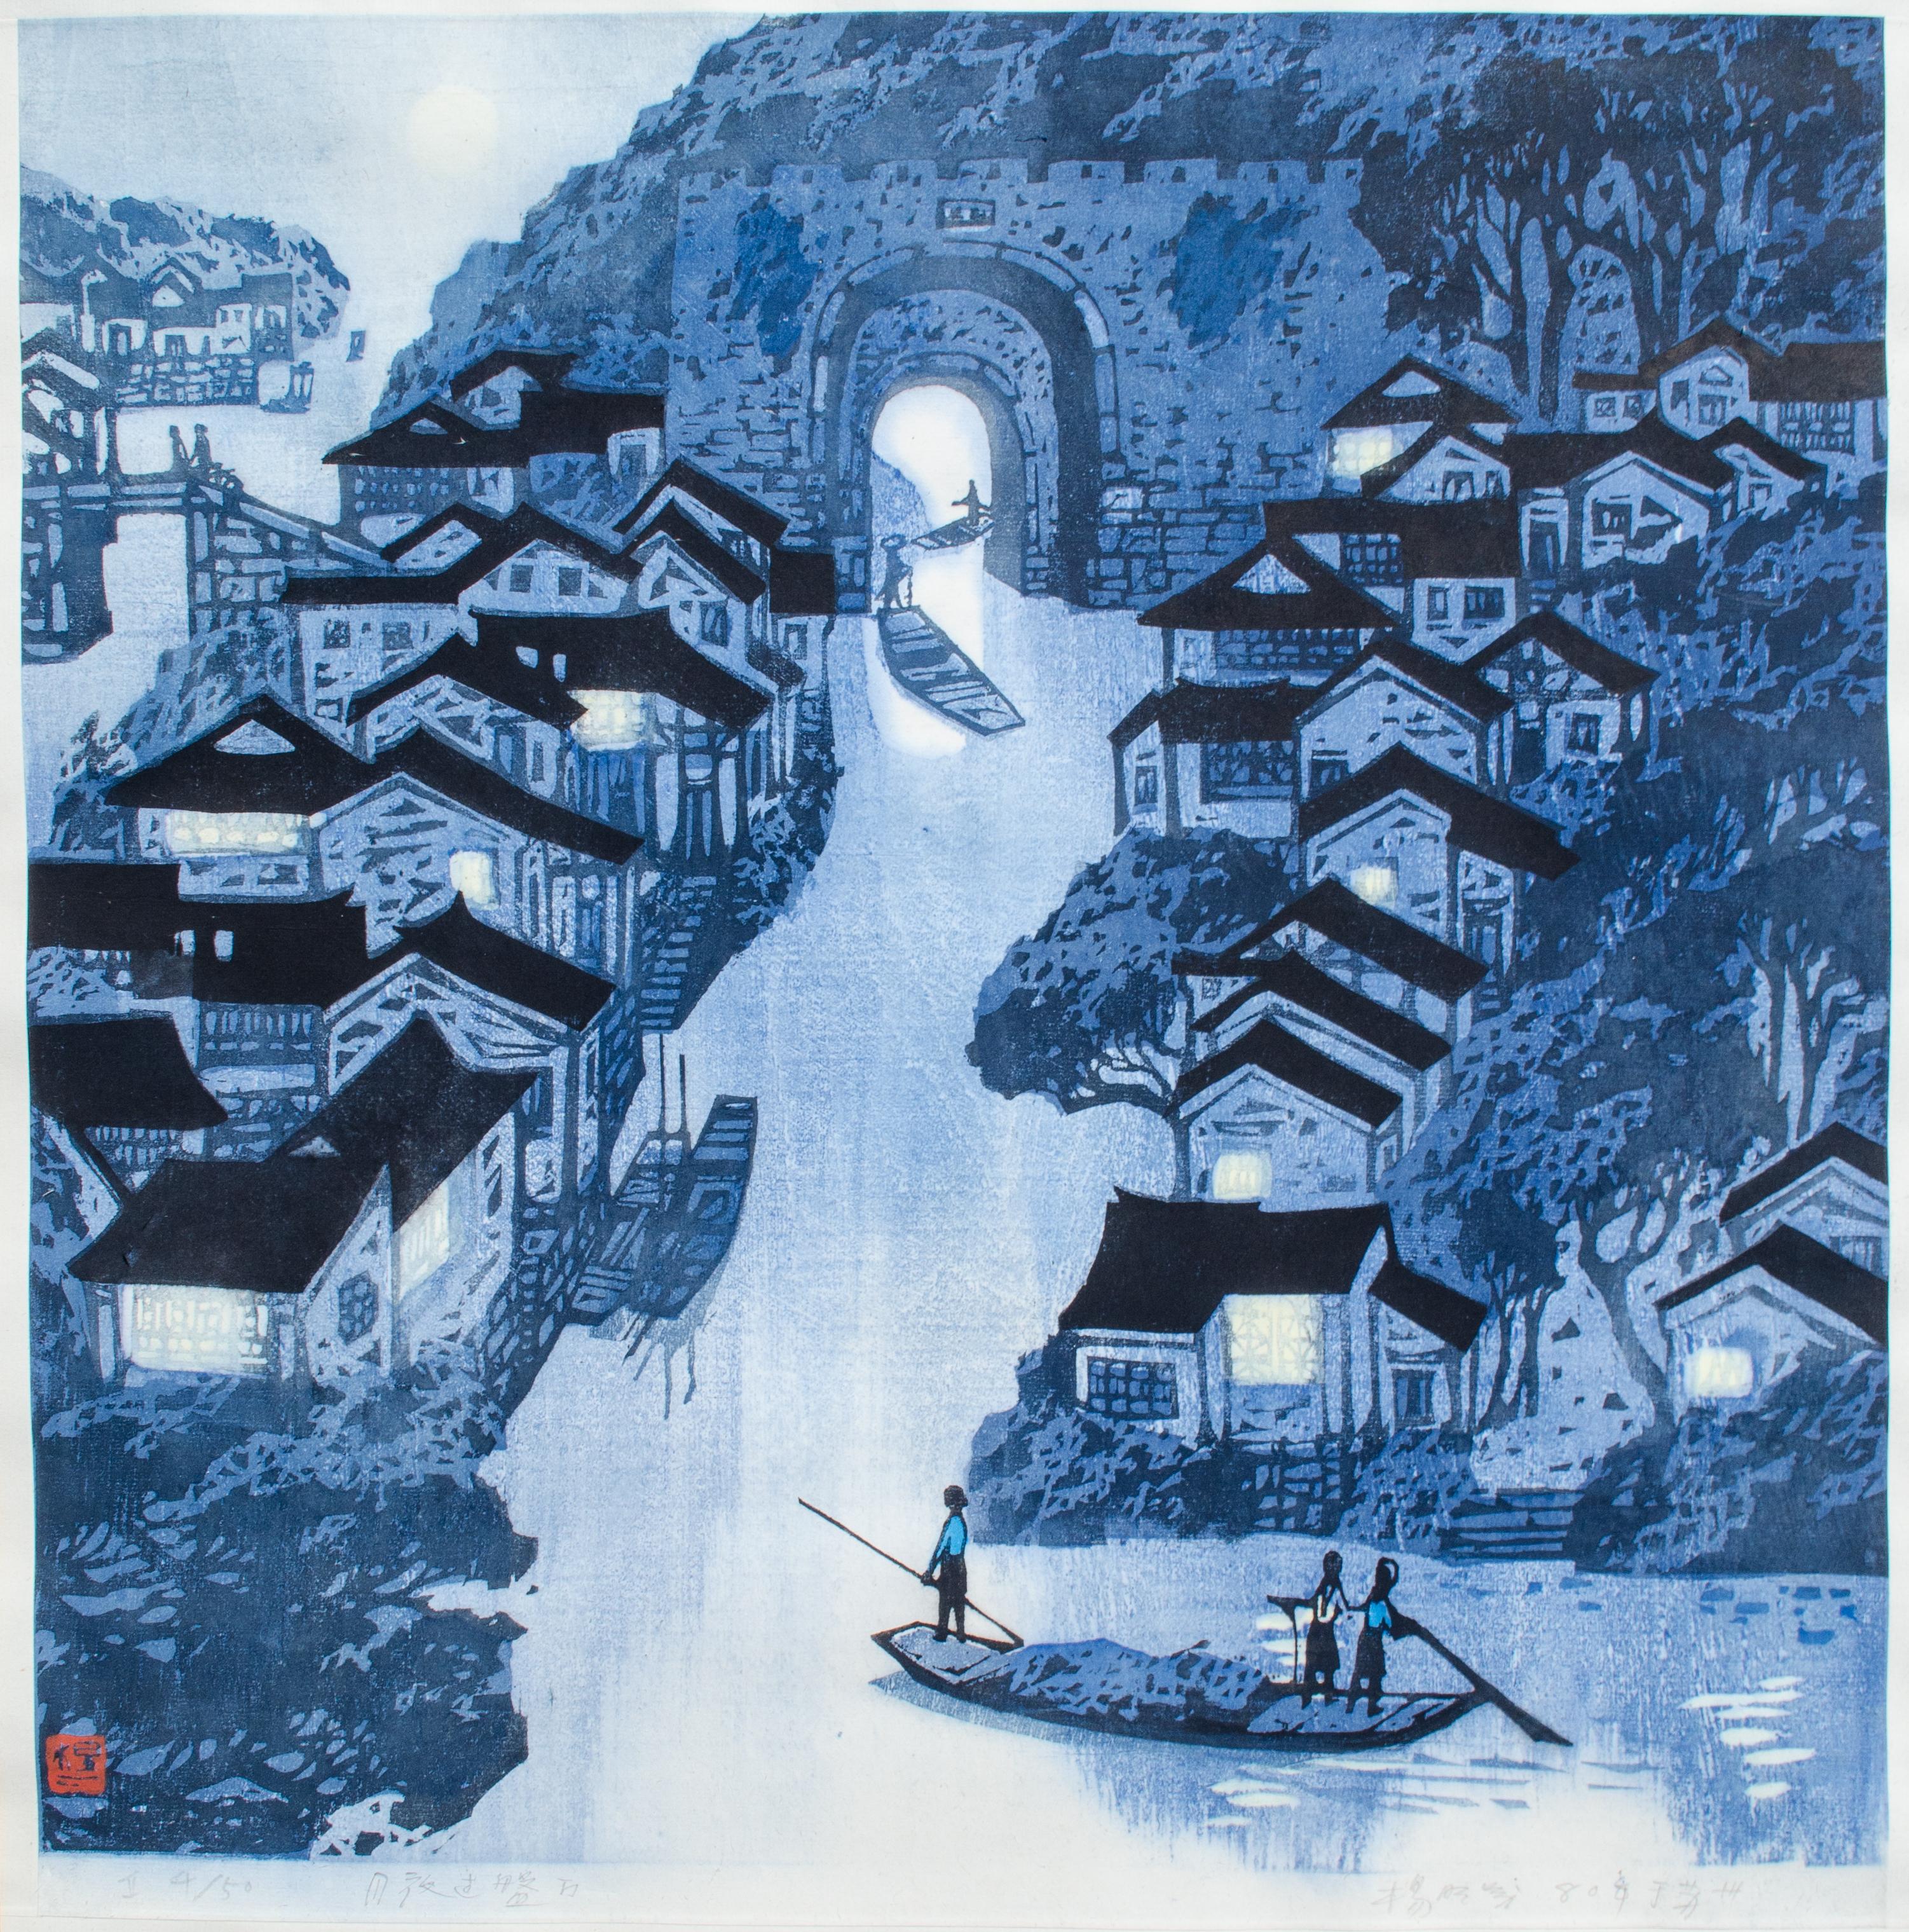 Yang Mingyi (Chinese, b. 1943)
Passing Through at Winding Gates by Moonlight, 1980
Lithograph
Sight: 19 1/4 x 16 5/8 in.
Framed: 22 5/8 x 22 1/4 x 3/4 in.
Signed, dated, inscribed, and numbered 4/50 on bottom

Yang Mingyi was born in 1943 in Suzhou.